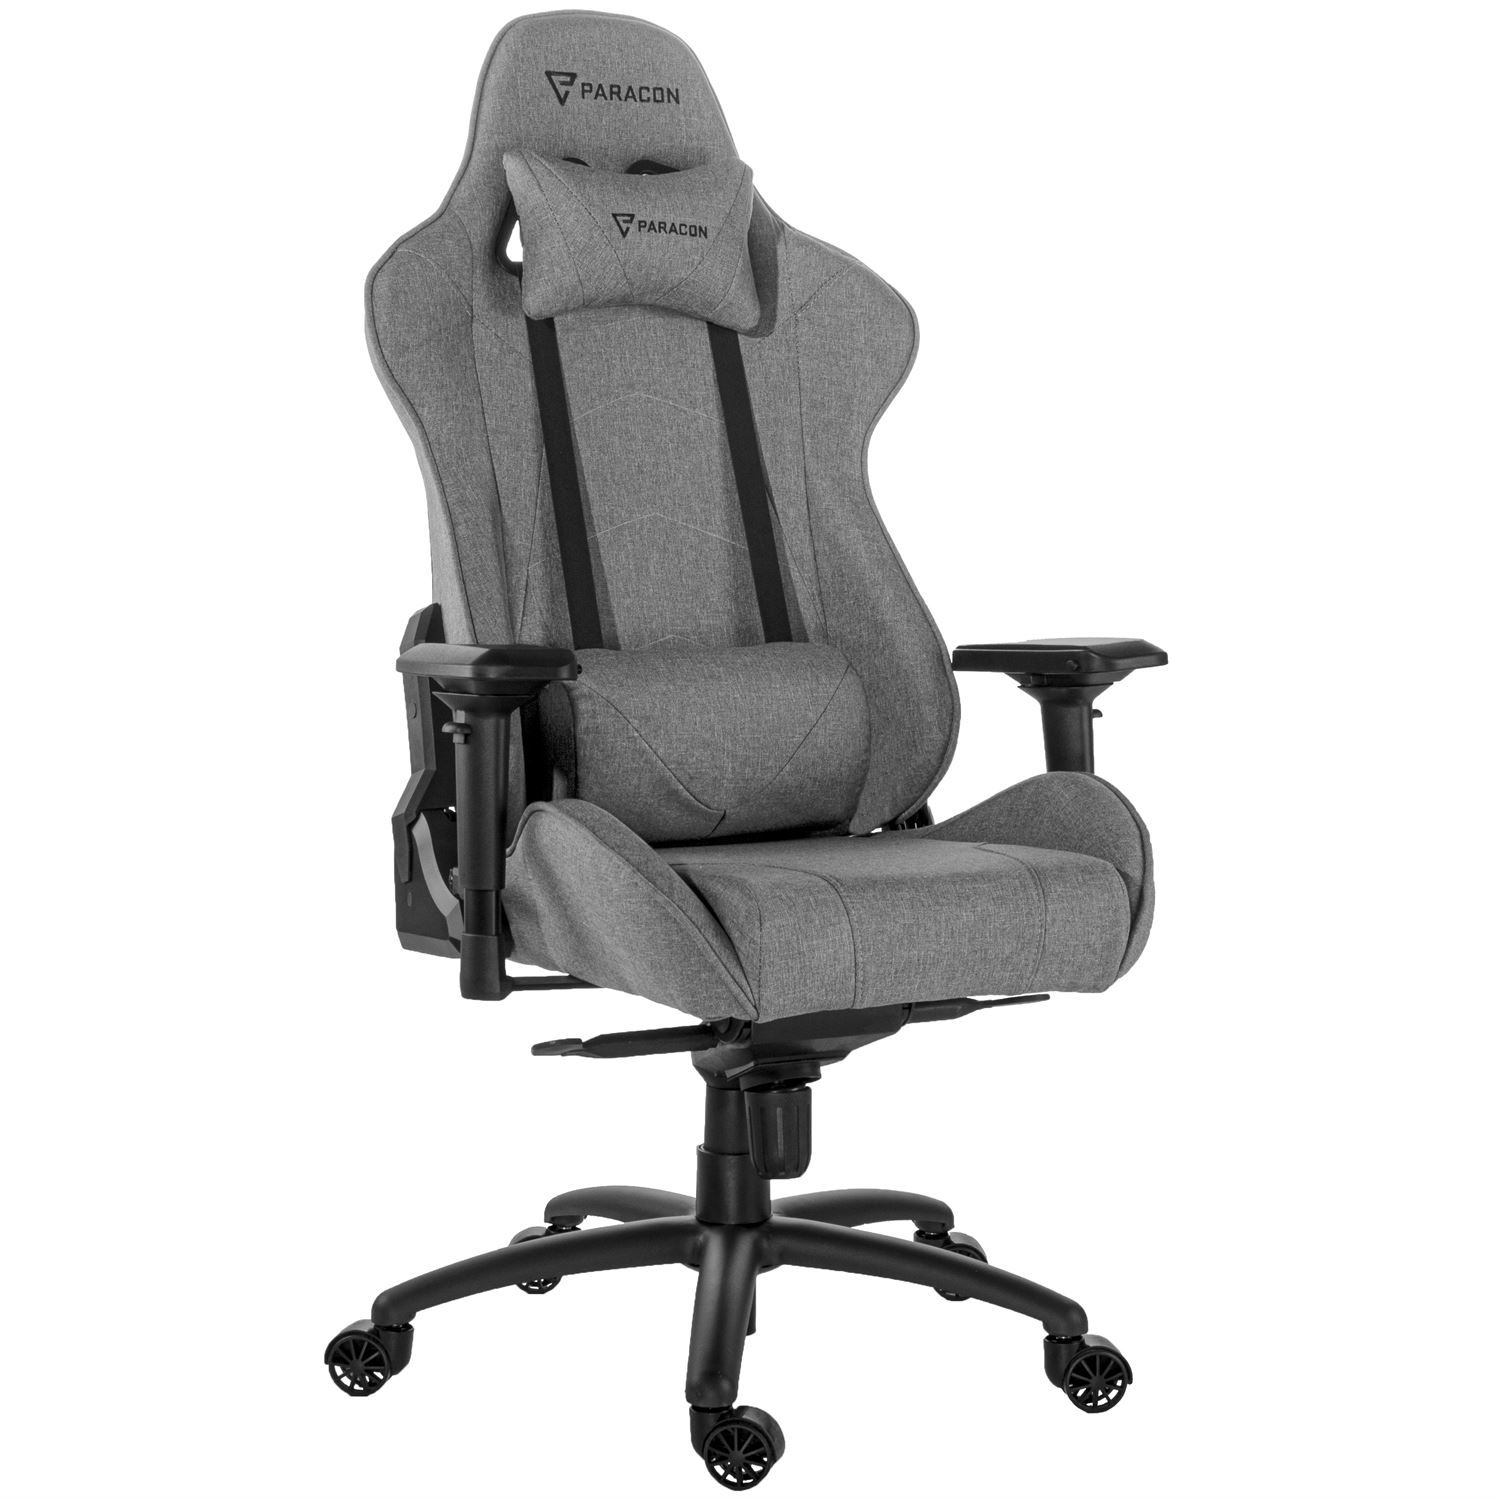 hoppe Ord Barber Paracon KNIGHT Pro Gaming Chair - Textile - Grey | Paracon